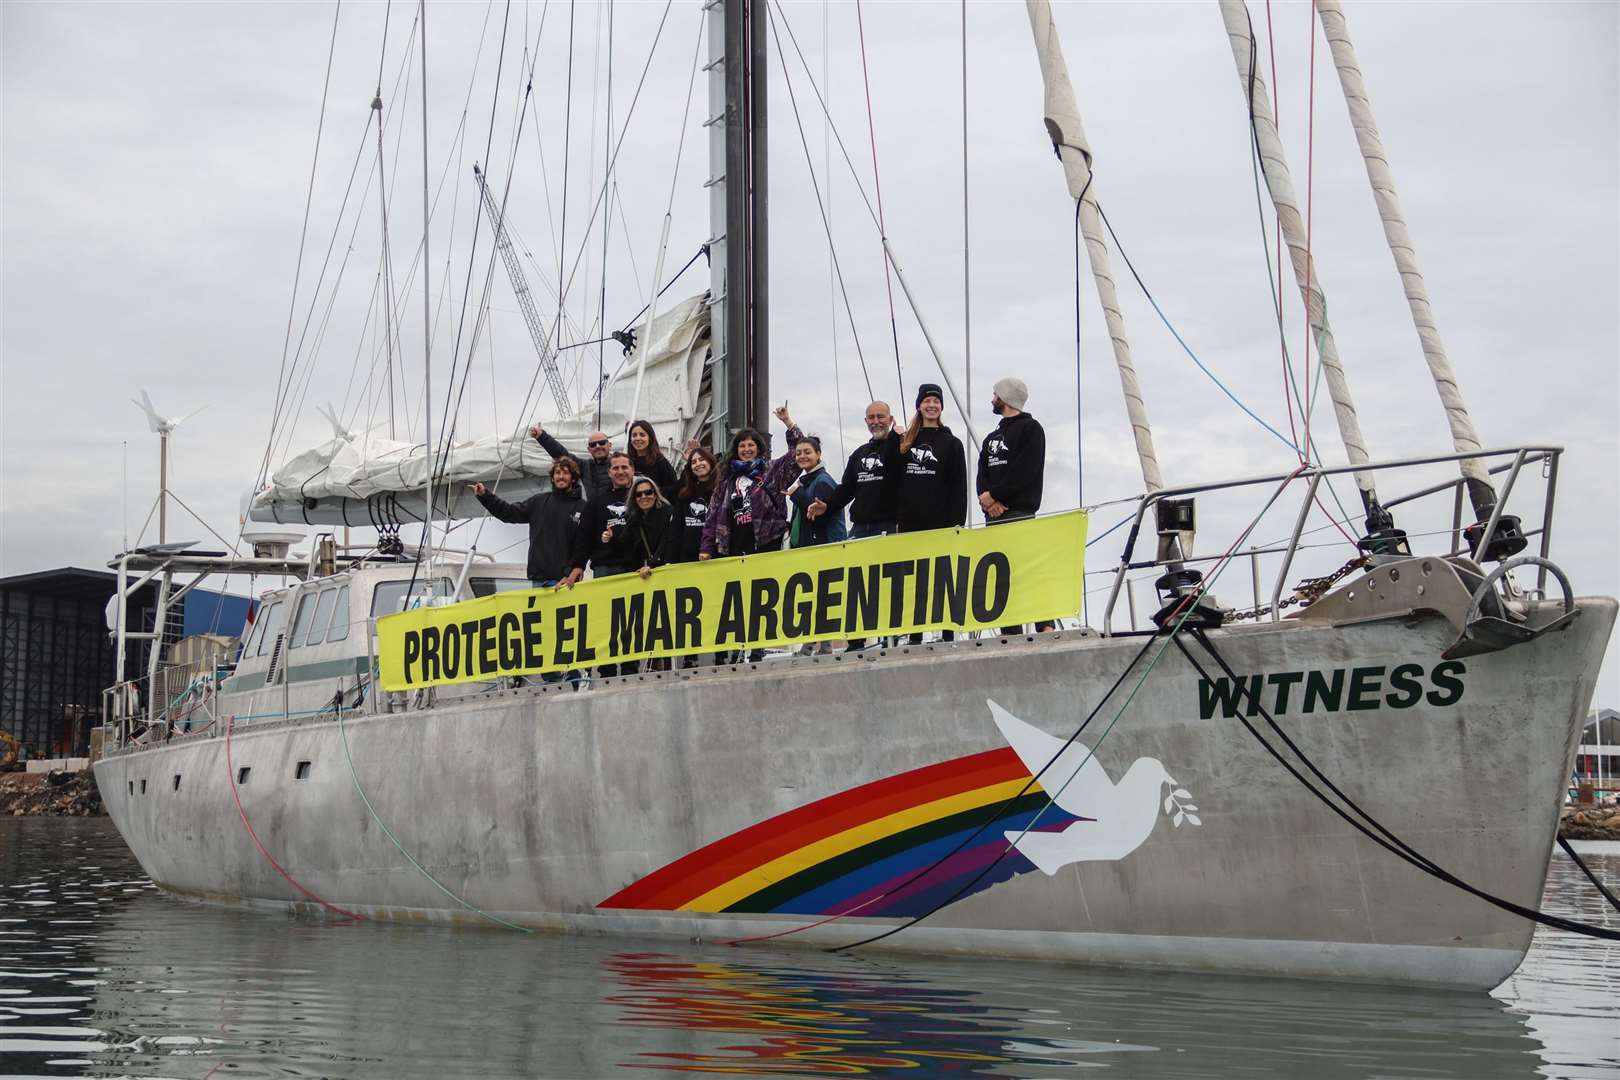 The civil society organisation, Whale Conservation Institute (ICB) and Greenpeace, aboard the M/Y Witness, a Greenpeace sailboat, in the Argentine Sea (Osvaldo Tesoro/Greenpeace)